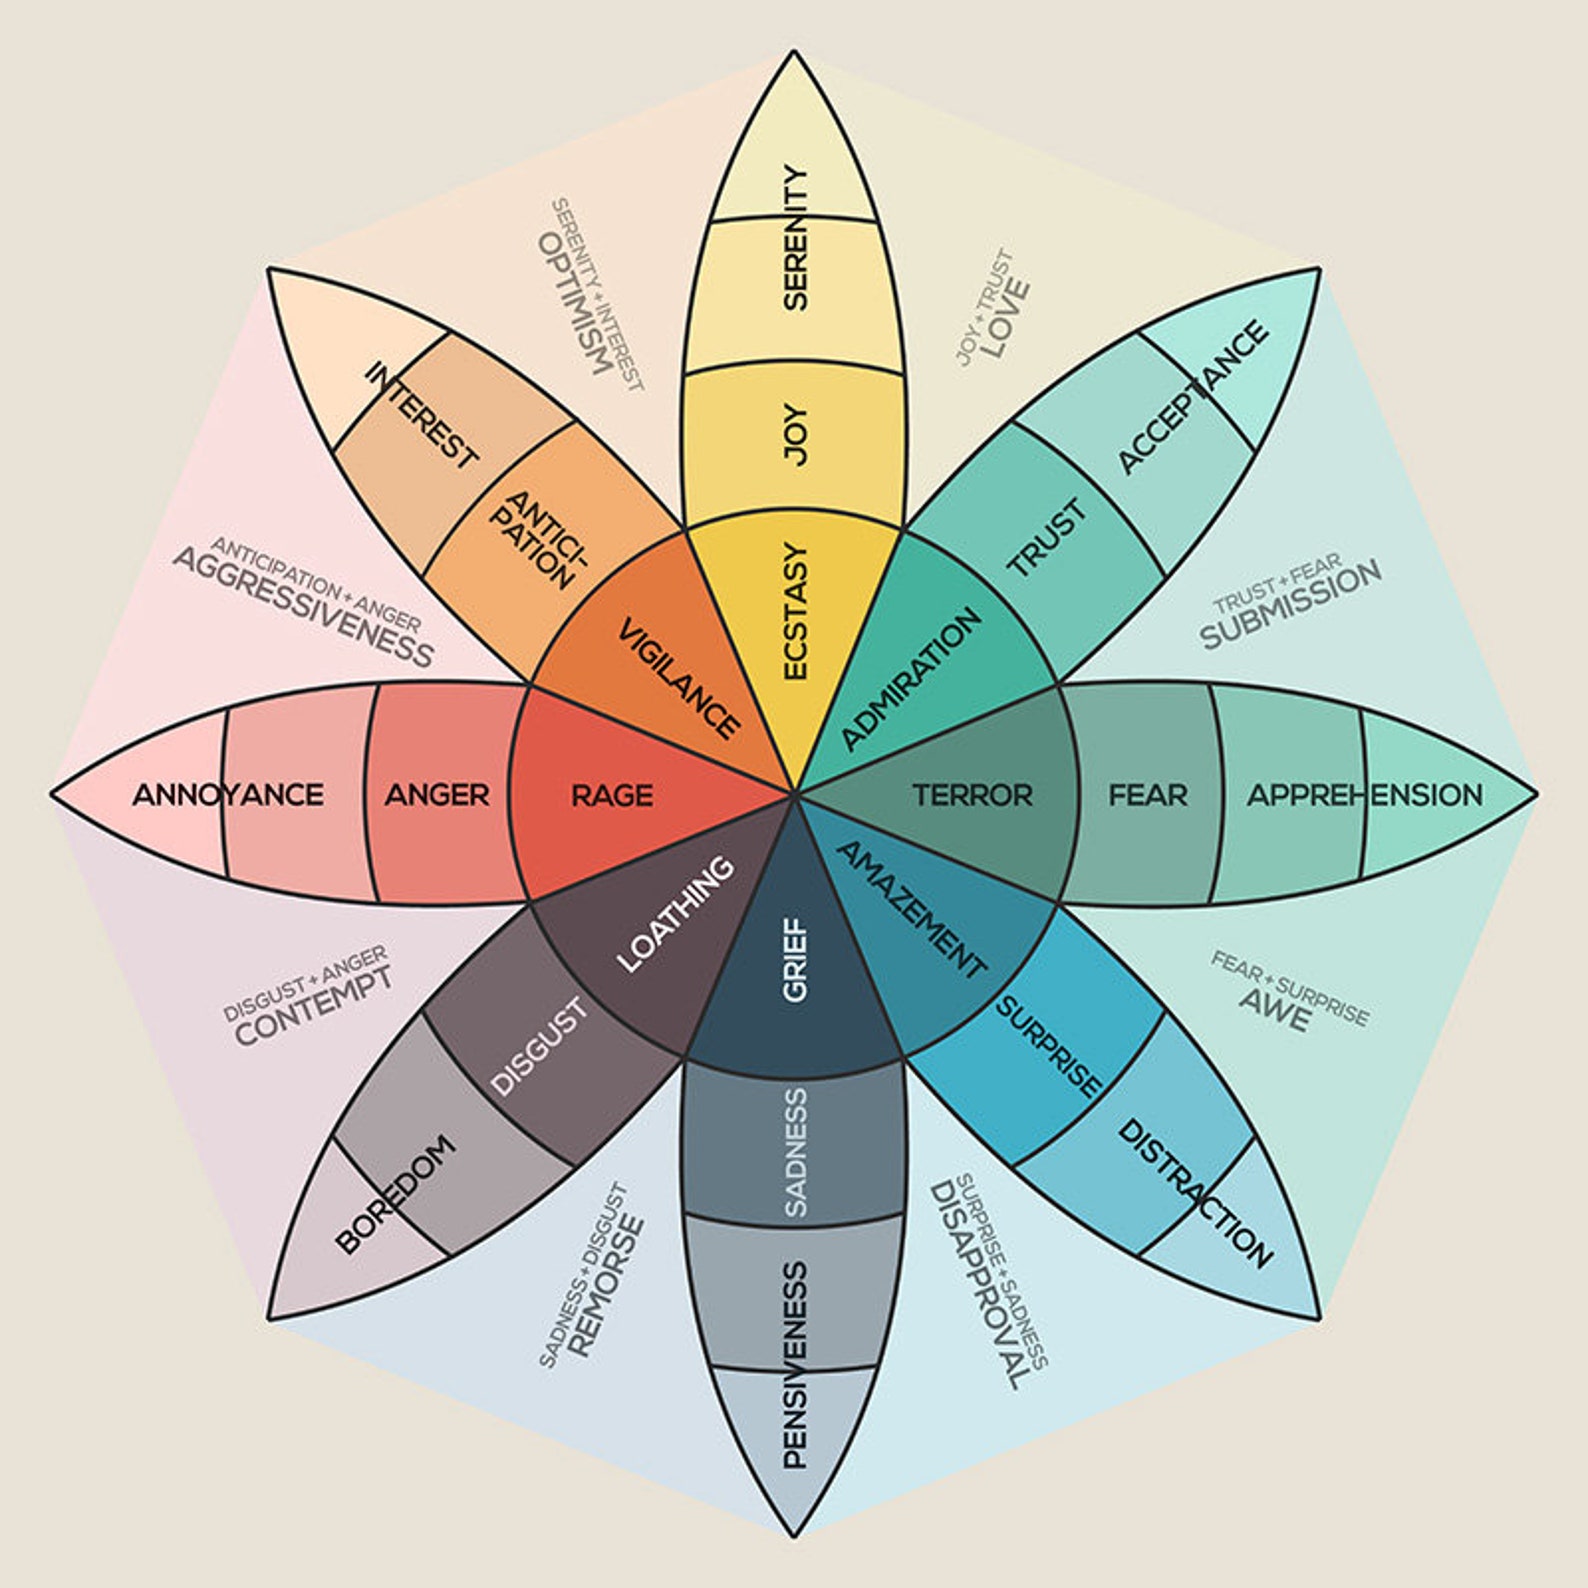 Plutchiks Wheel Of Emotions And Feelings Chart Poster Etsy | Images and ...